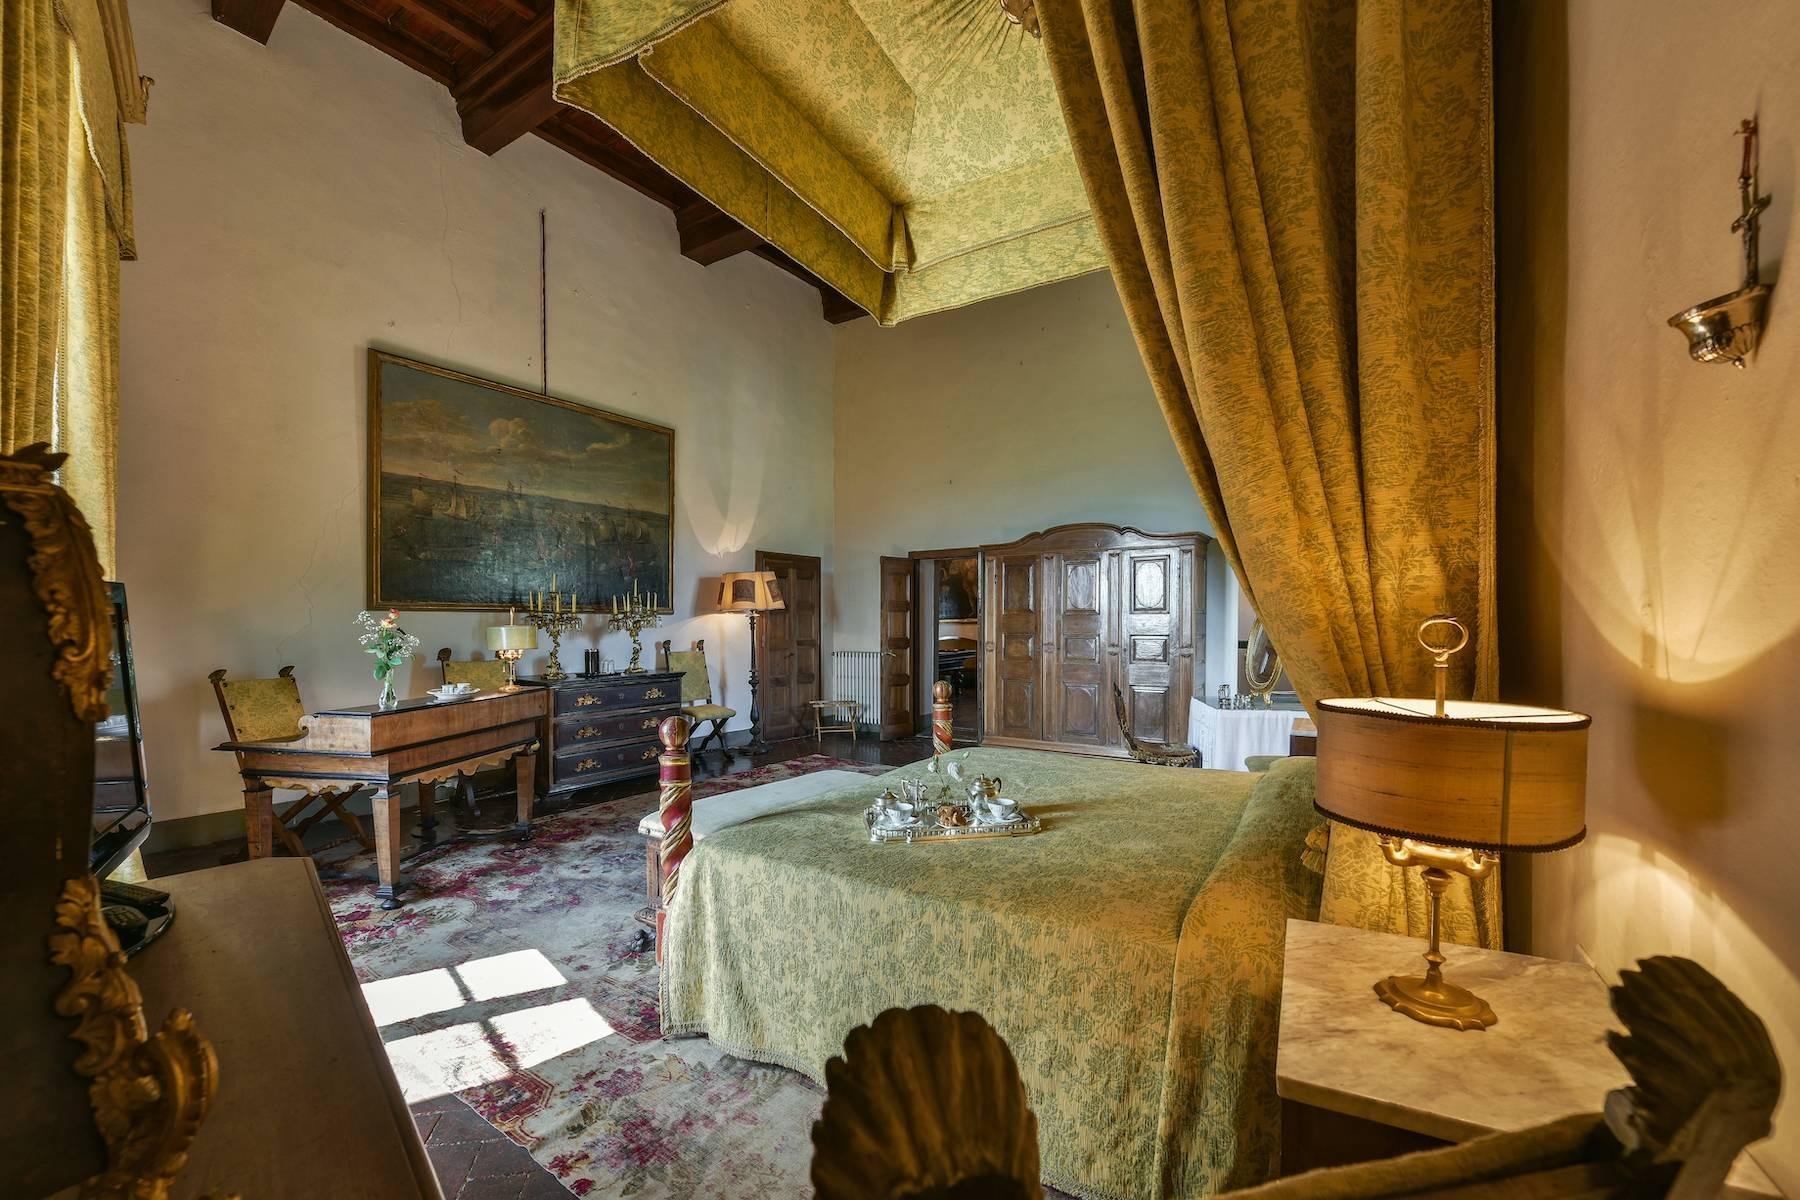 Francis York  Tuscan Villa Owned by Italian Aristocracy Available to Book as a Luxury Villa Rental 6.jpg